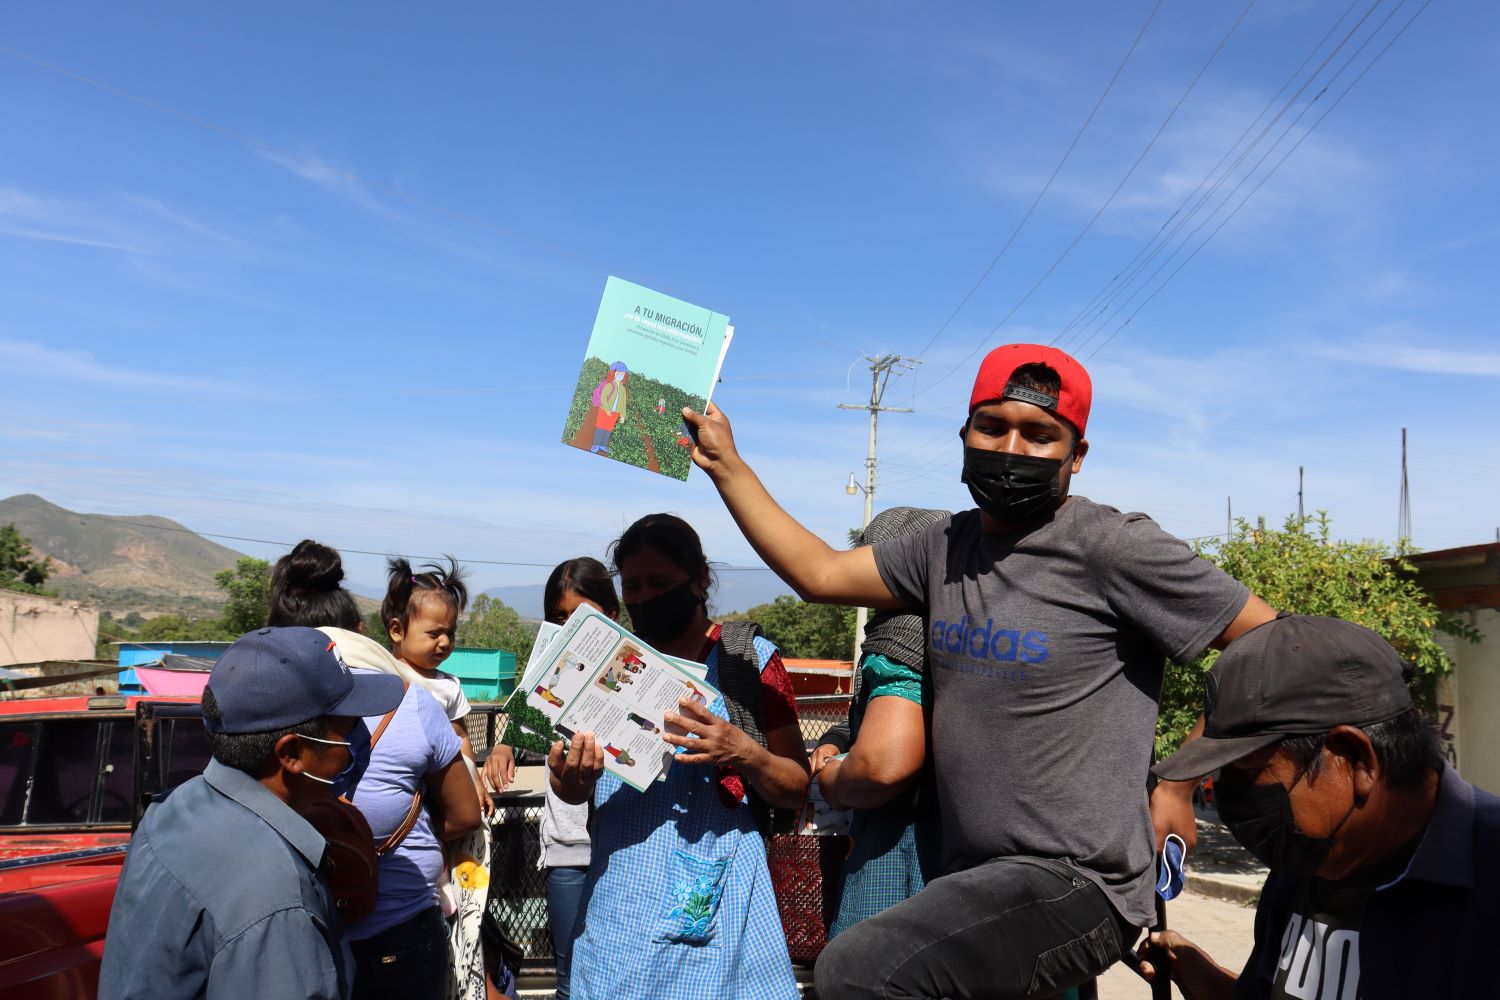 An image of migrants holding training materials about safe migration